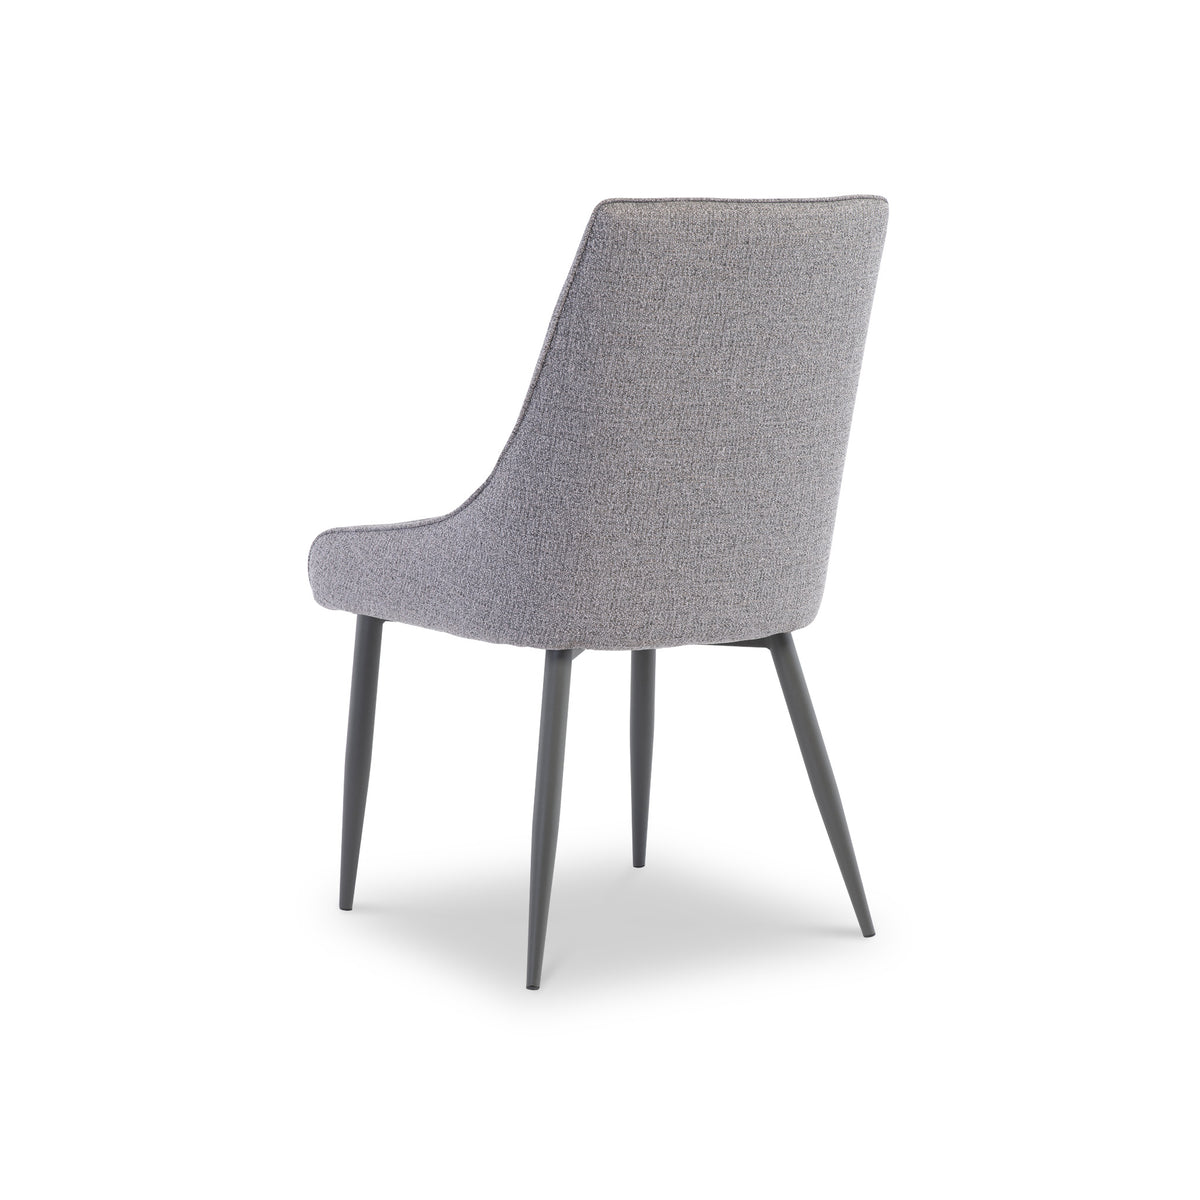 Rio Mineral Grey Dining Chair